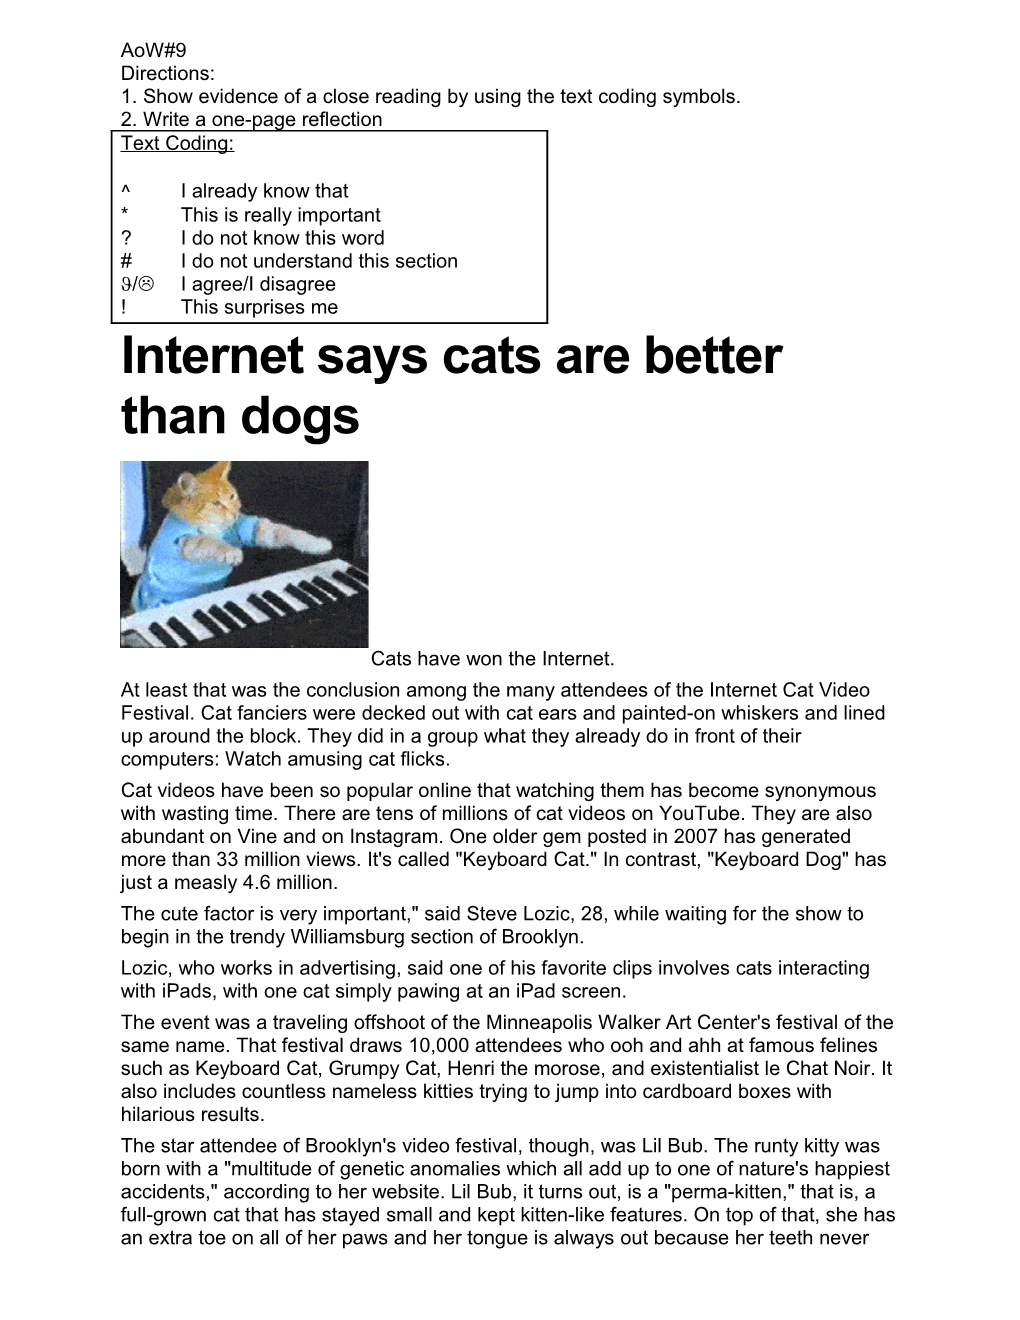 Internet Says Cats Are Better Than Dogs